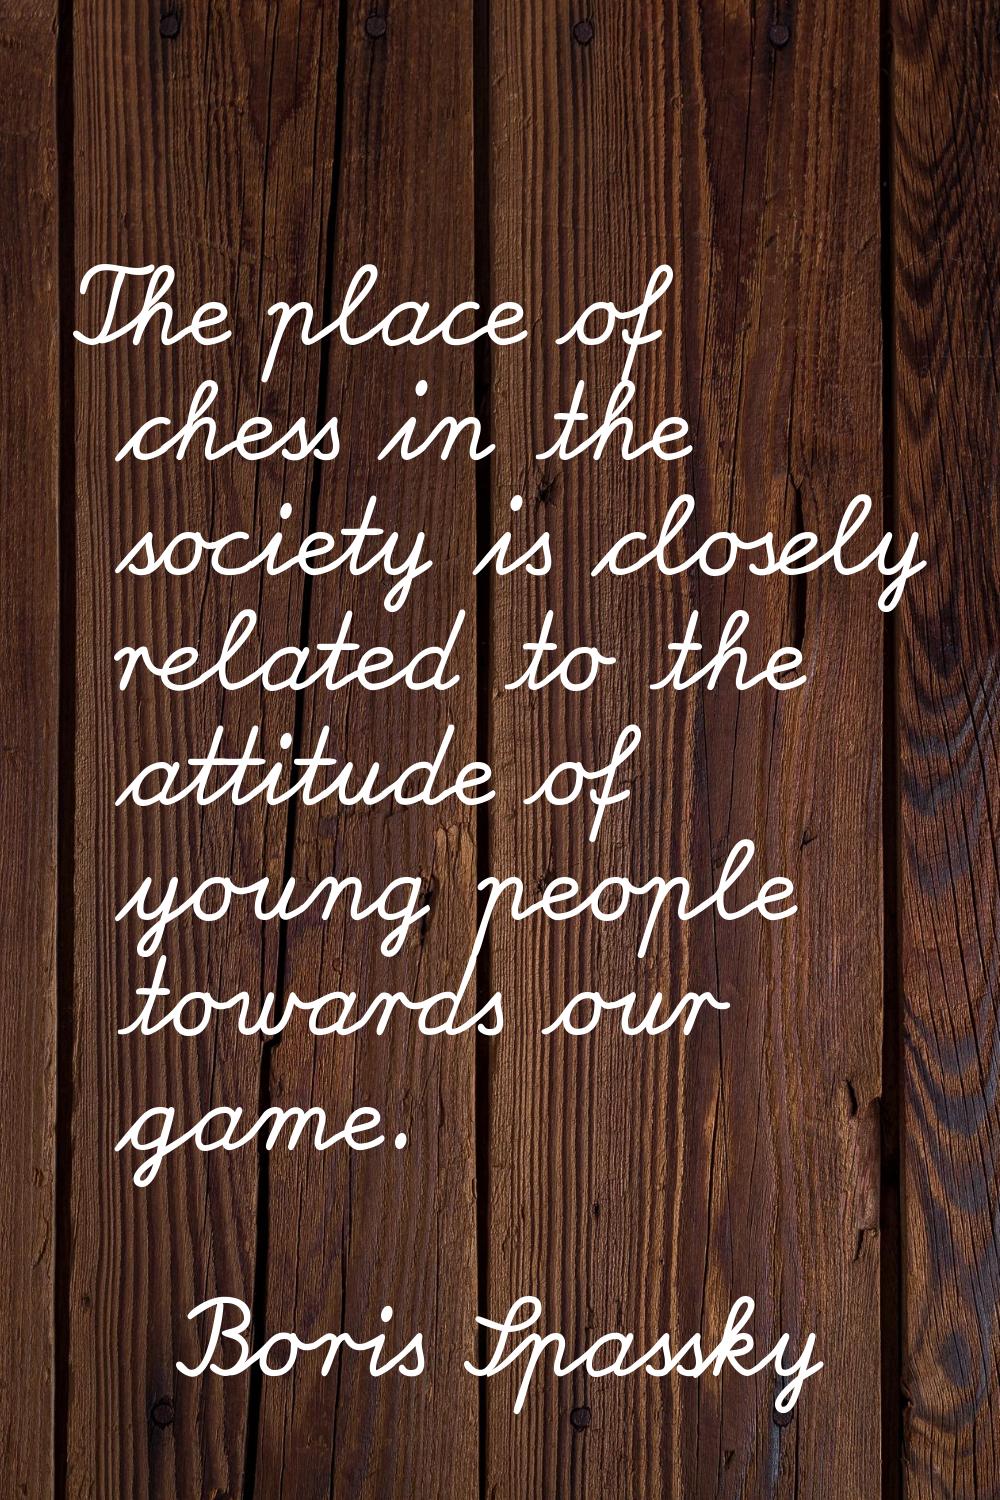 The place of chess in the society is closely related to the attitude of young people towards our ga